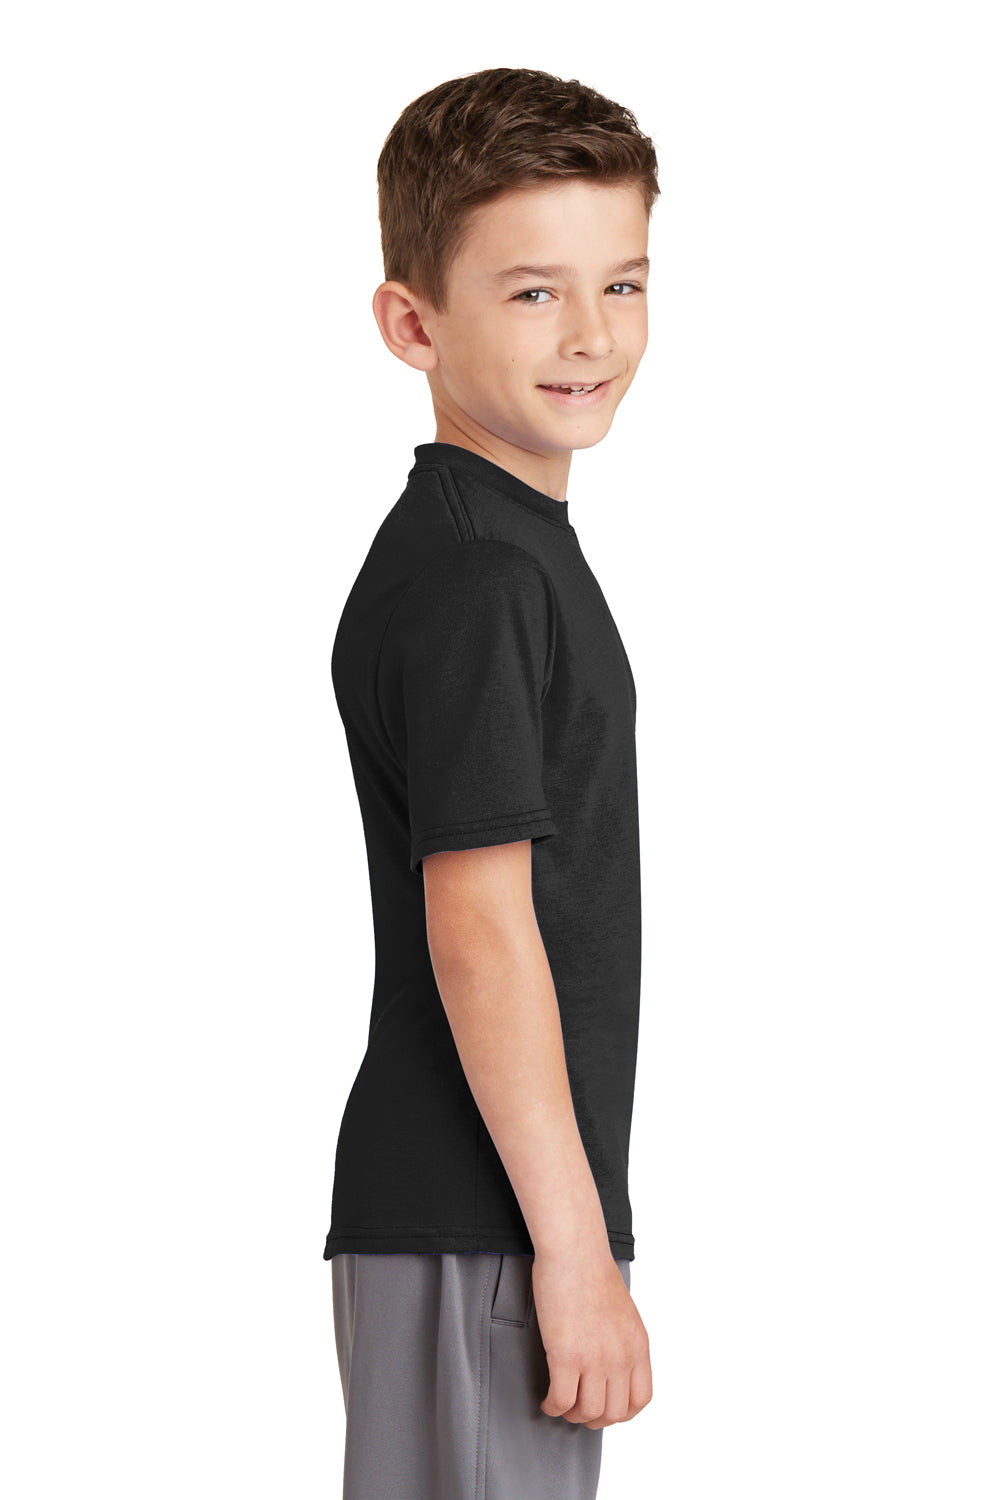 Port & Company PC381Y Youth Dry Zone Performance Moisture Wicking Short Sleeve Crewneck T-Shirt Black Side